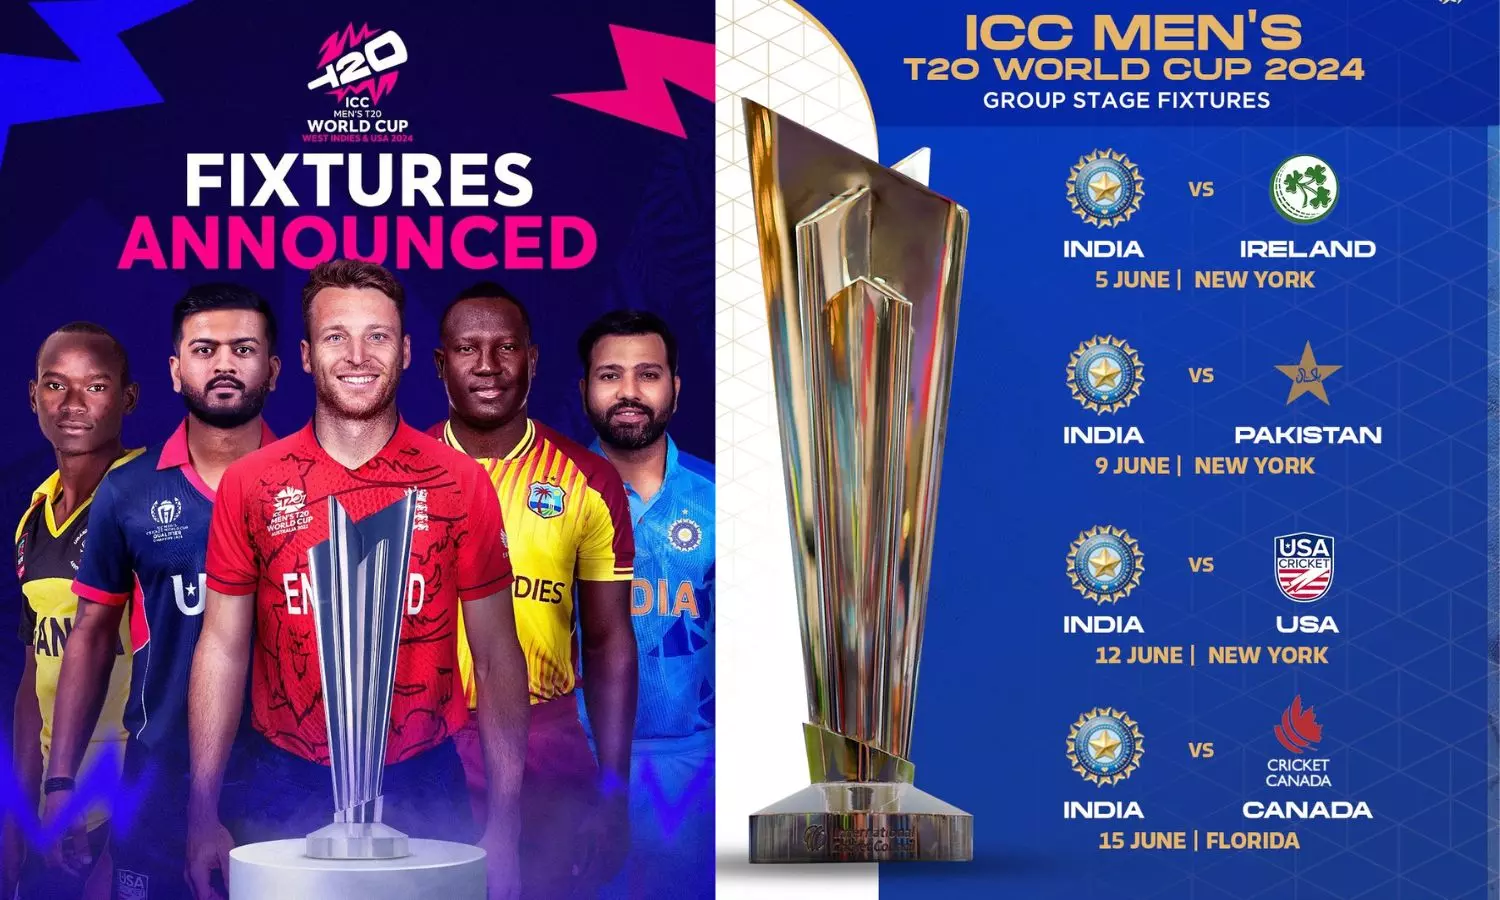 See here the complete schedule of all the matches of T20 World Cup 2024